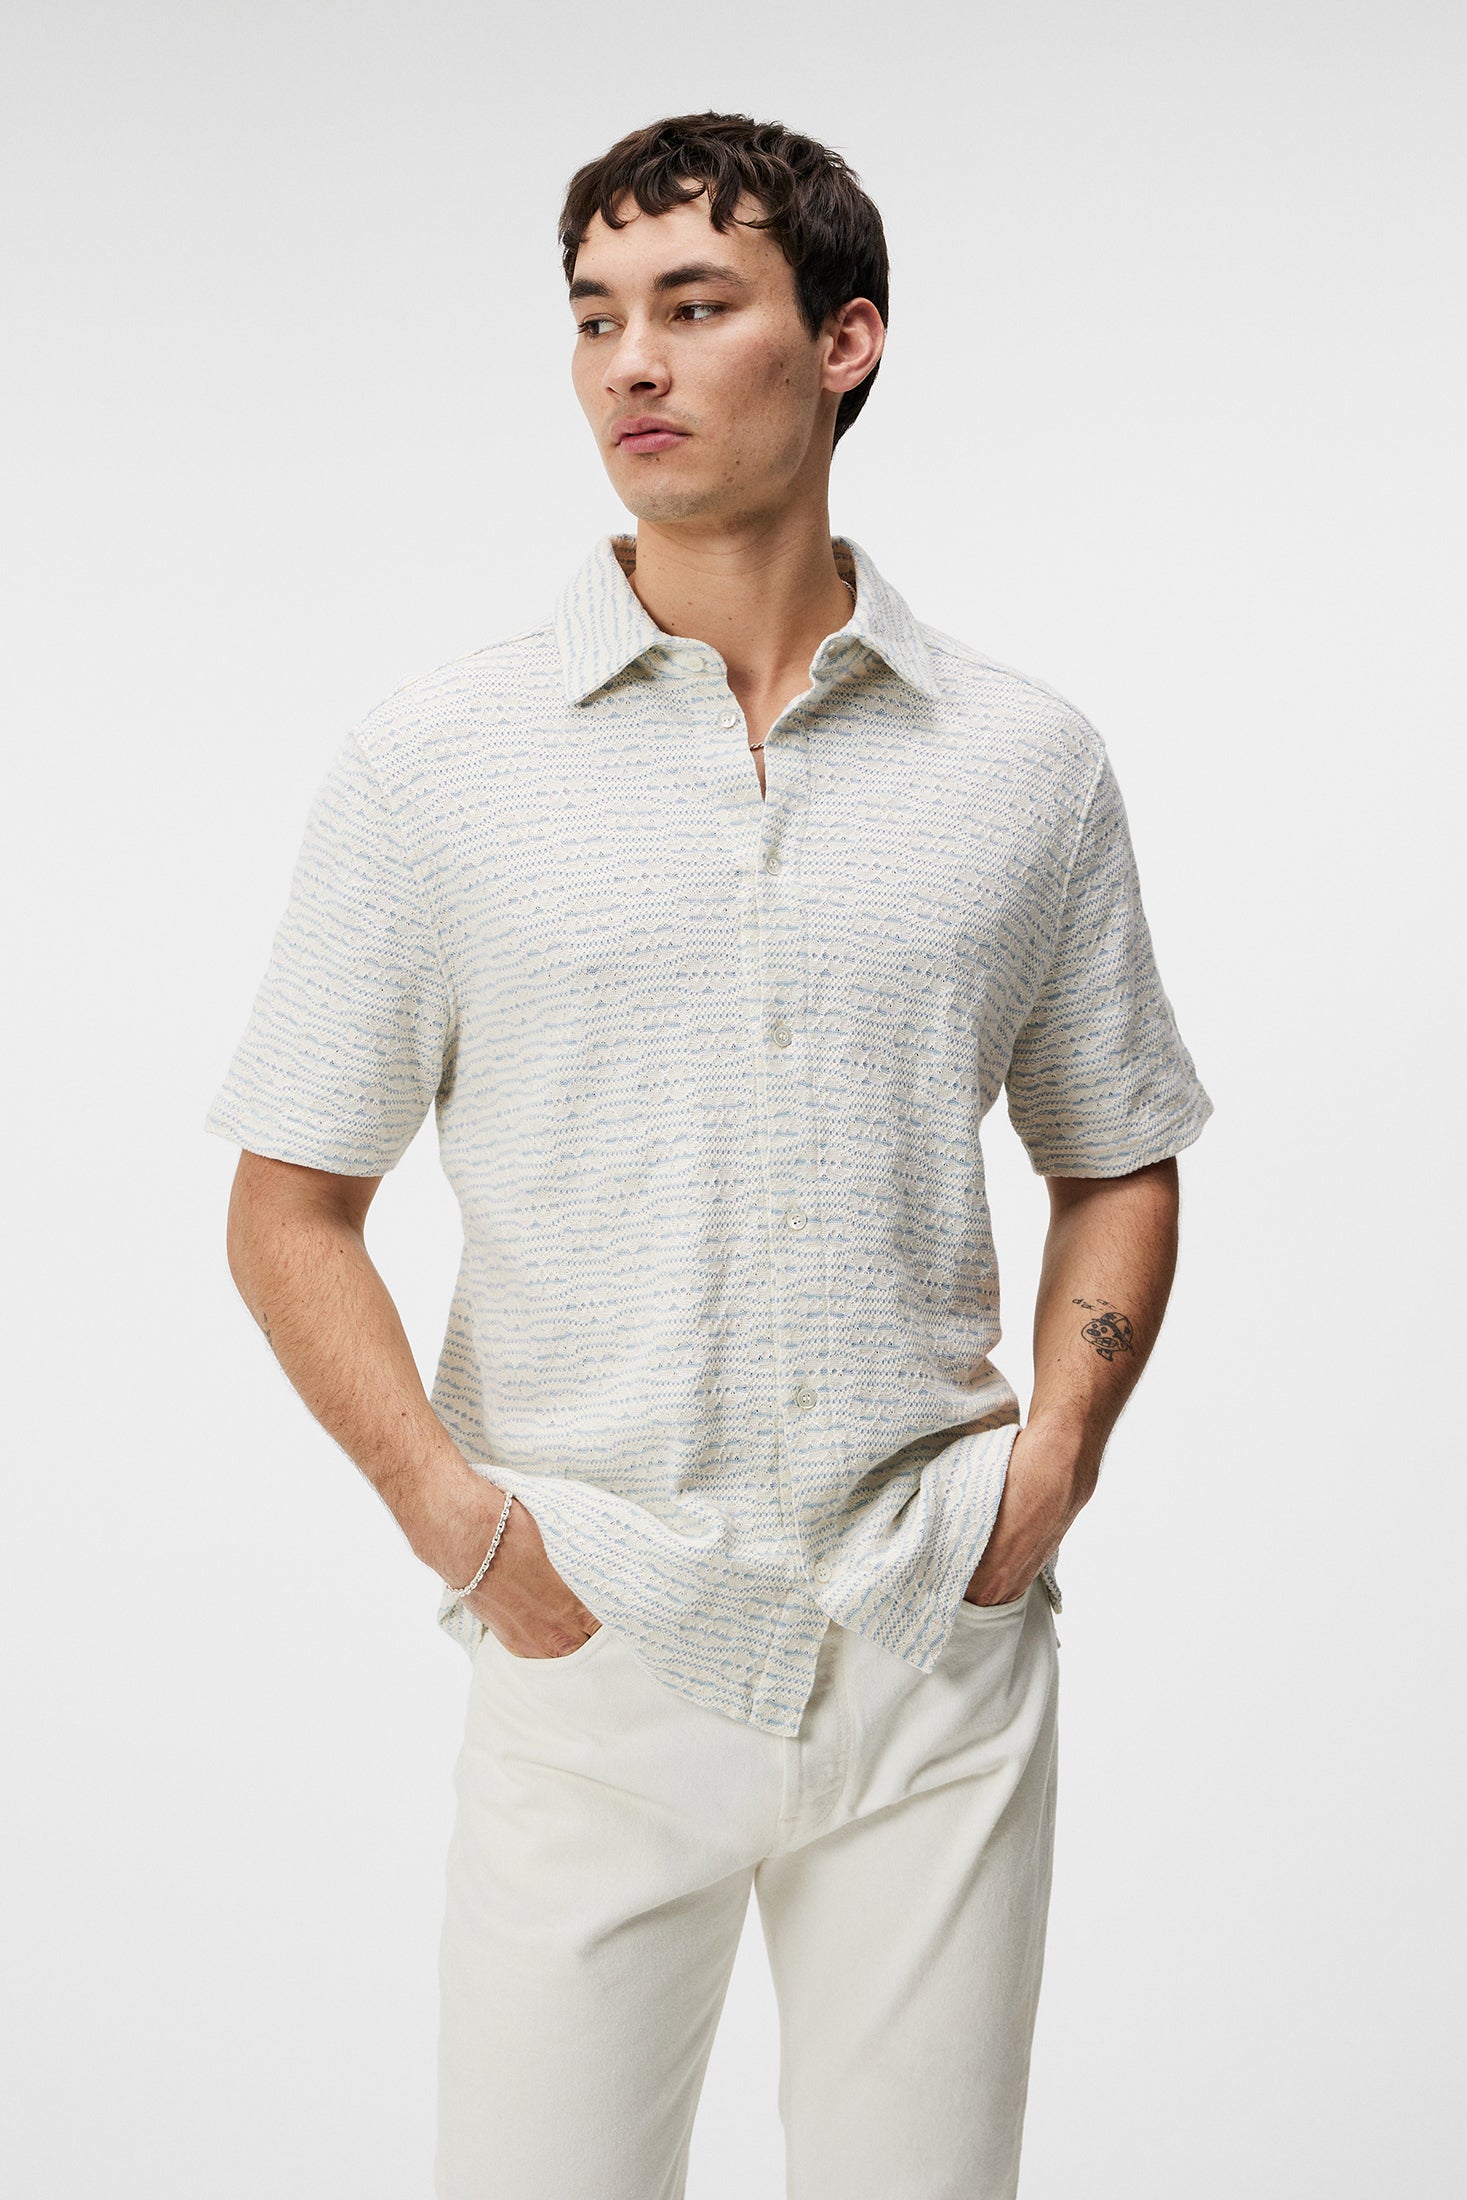 Torpa Structure Shirt